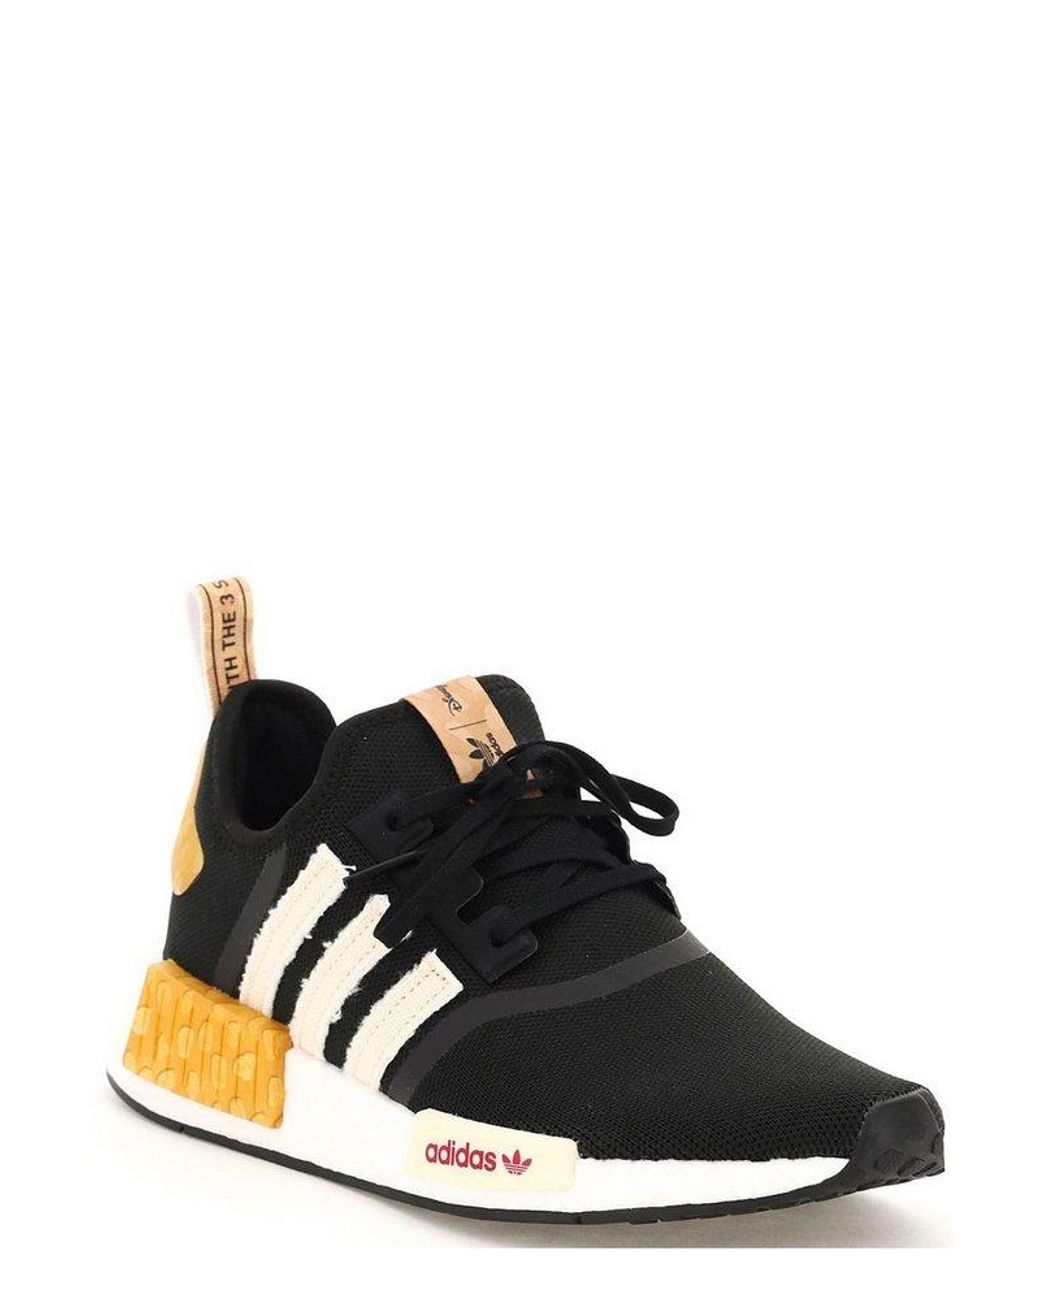 adidas Rubber Originals Nmd R1 Sneakers in Black | Lyst